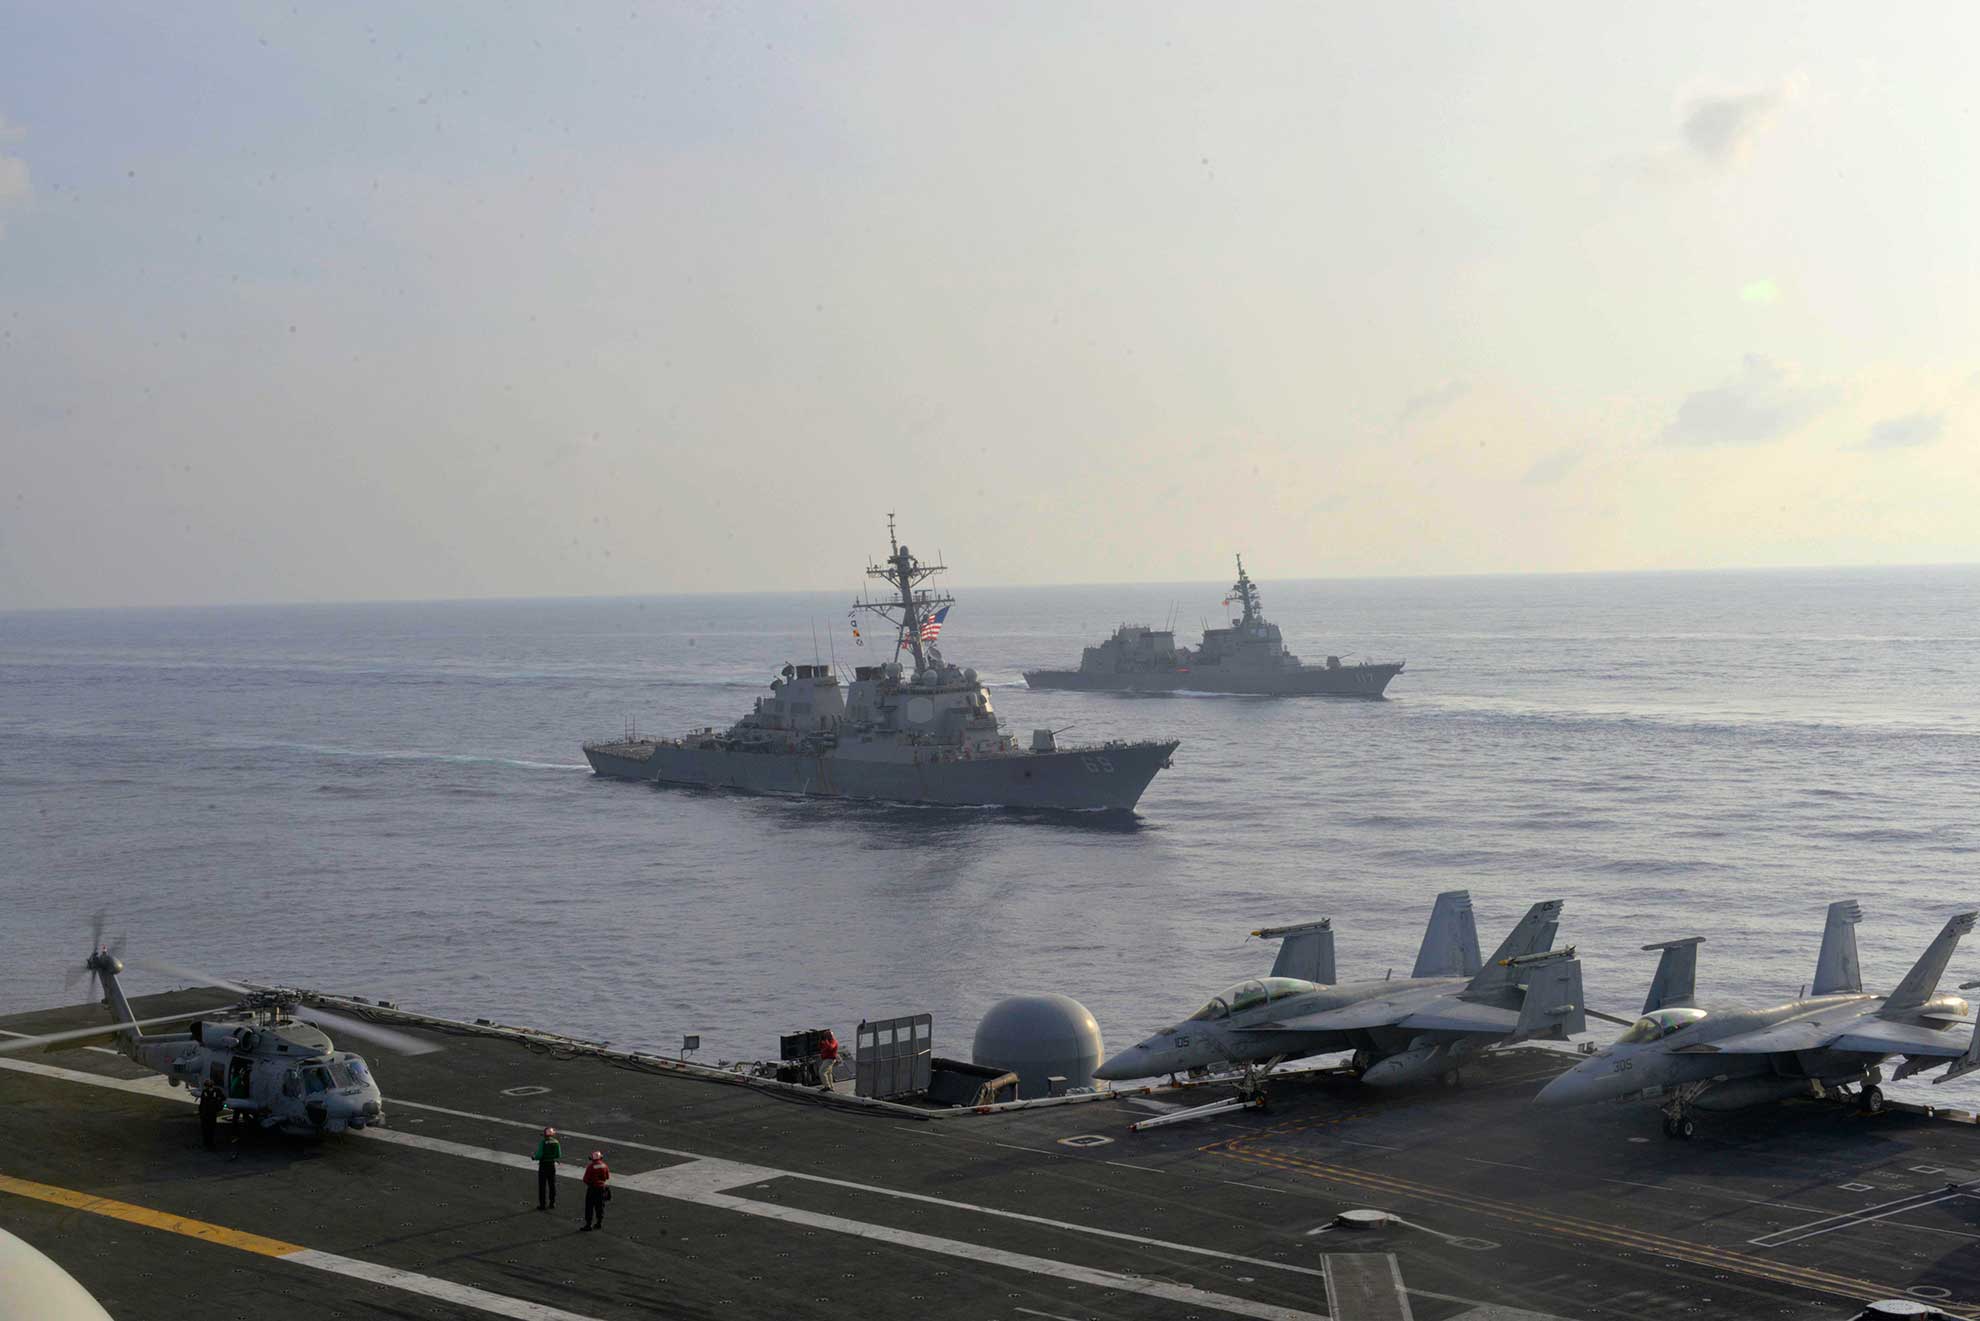 South China Sea (Aug. 31, 2018) The guided-missile destroyer USS Milius (DDG 69) and the Japan Maritime Self-Defense Force (JMSDF) destroyer JS Suzutsuki (DD 117) are underway alongside the Navy's forward aircraft carrier USS Ronald Reagan (CVN 76) during a photo exercise with the JMSDF. The Ronald Reagan Carrier Strike Group is forward-deployed to the U.S. 7th Fleet area of operations in support of security and stability in the Indo-Pacific region -- U.S. Navy photo by MCS1 Timothy M. Black. -